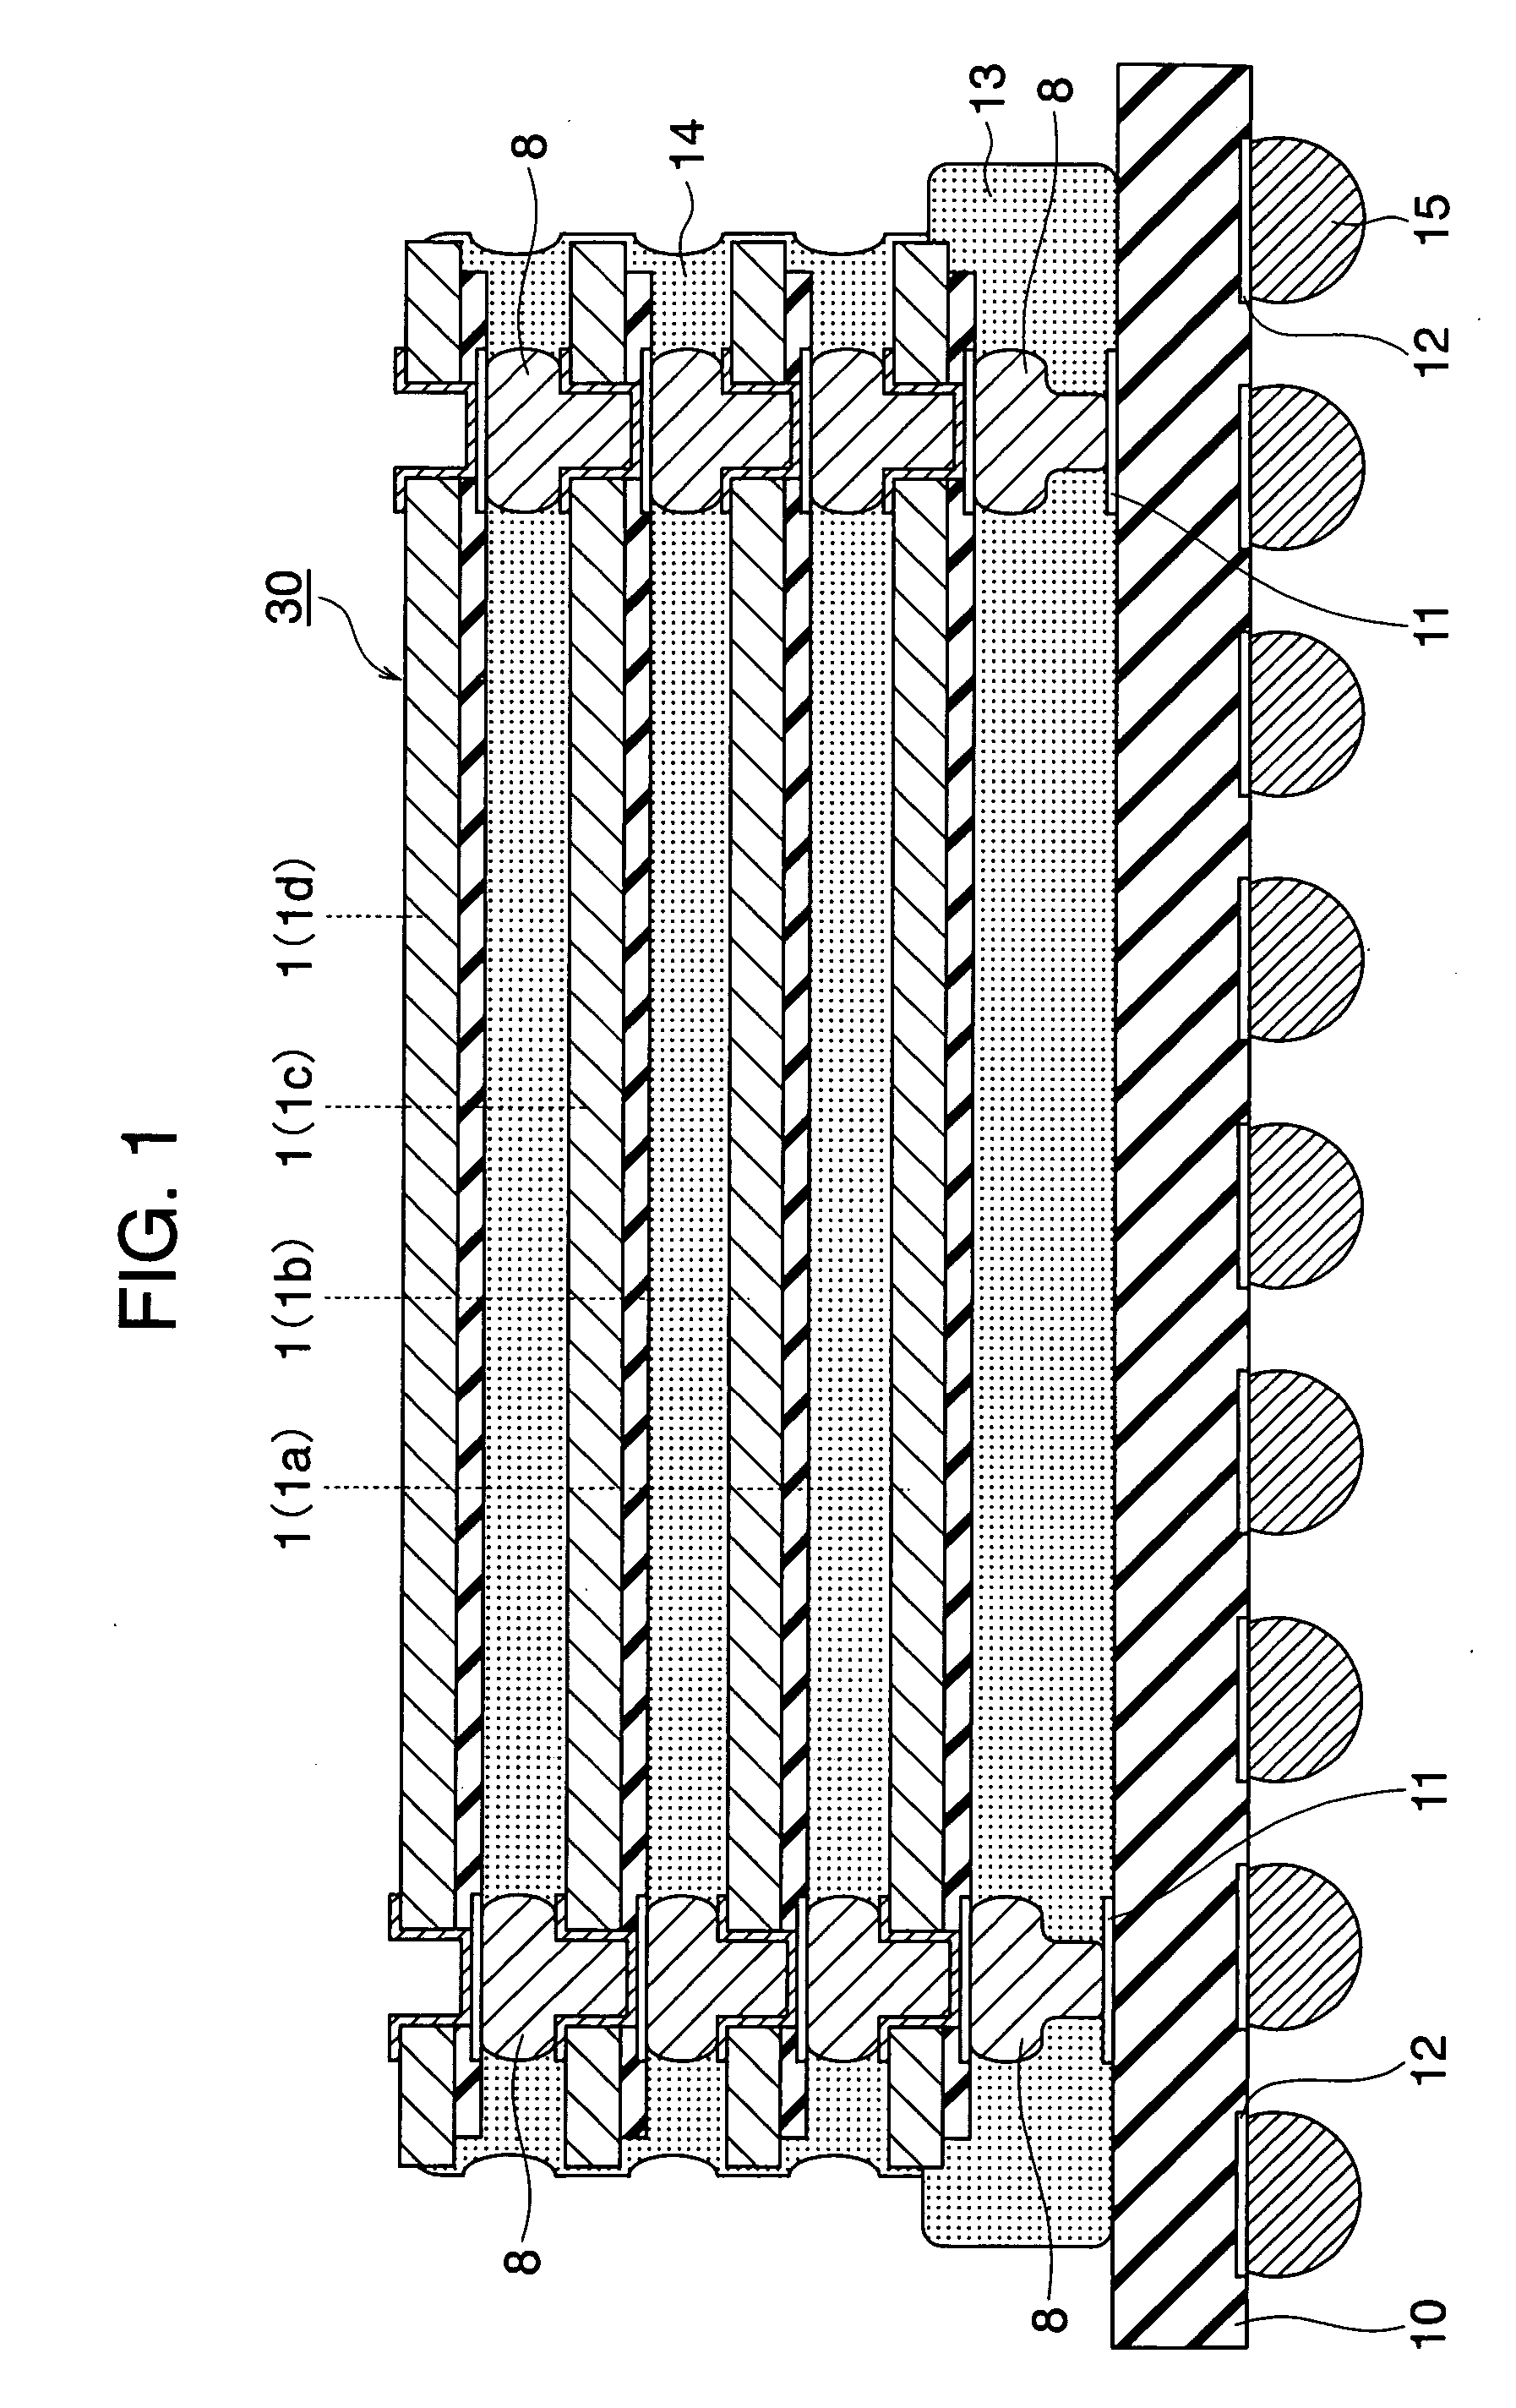 Semiconductor device and manufacturing process therefor